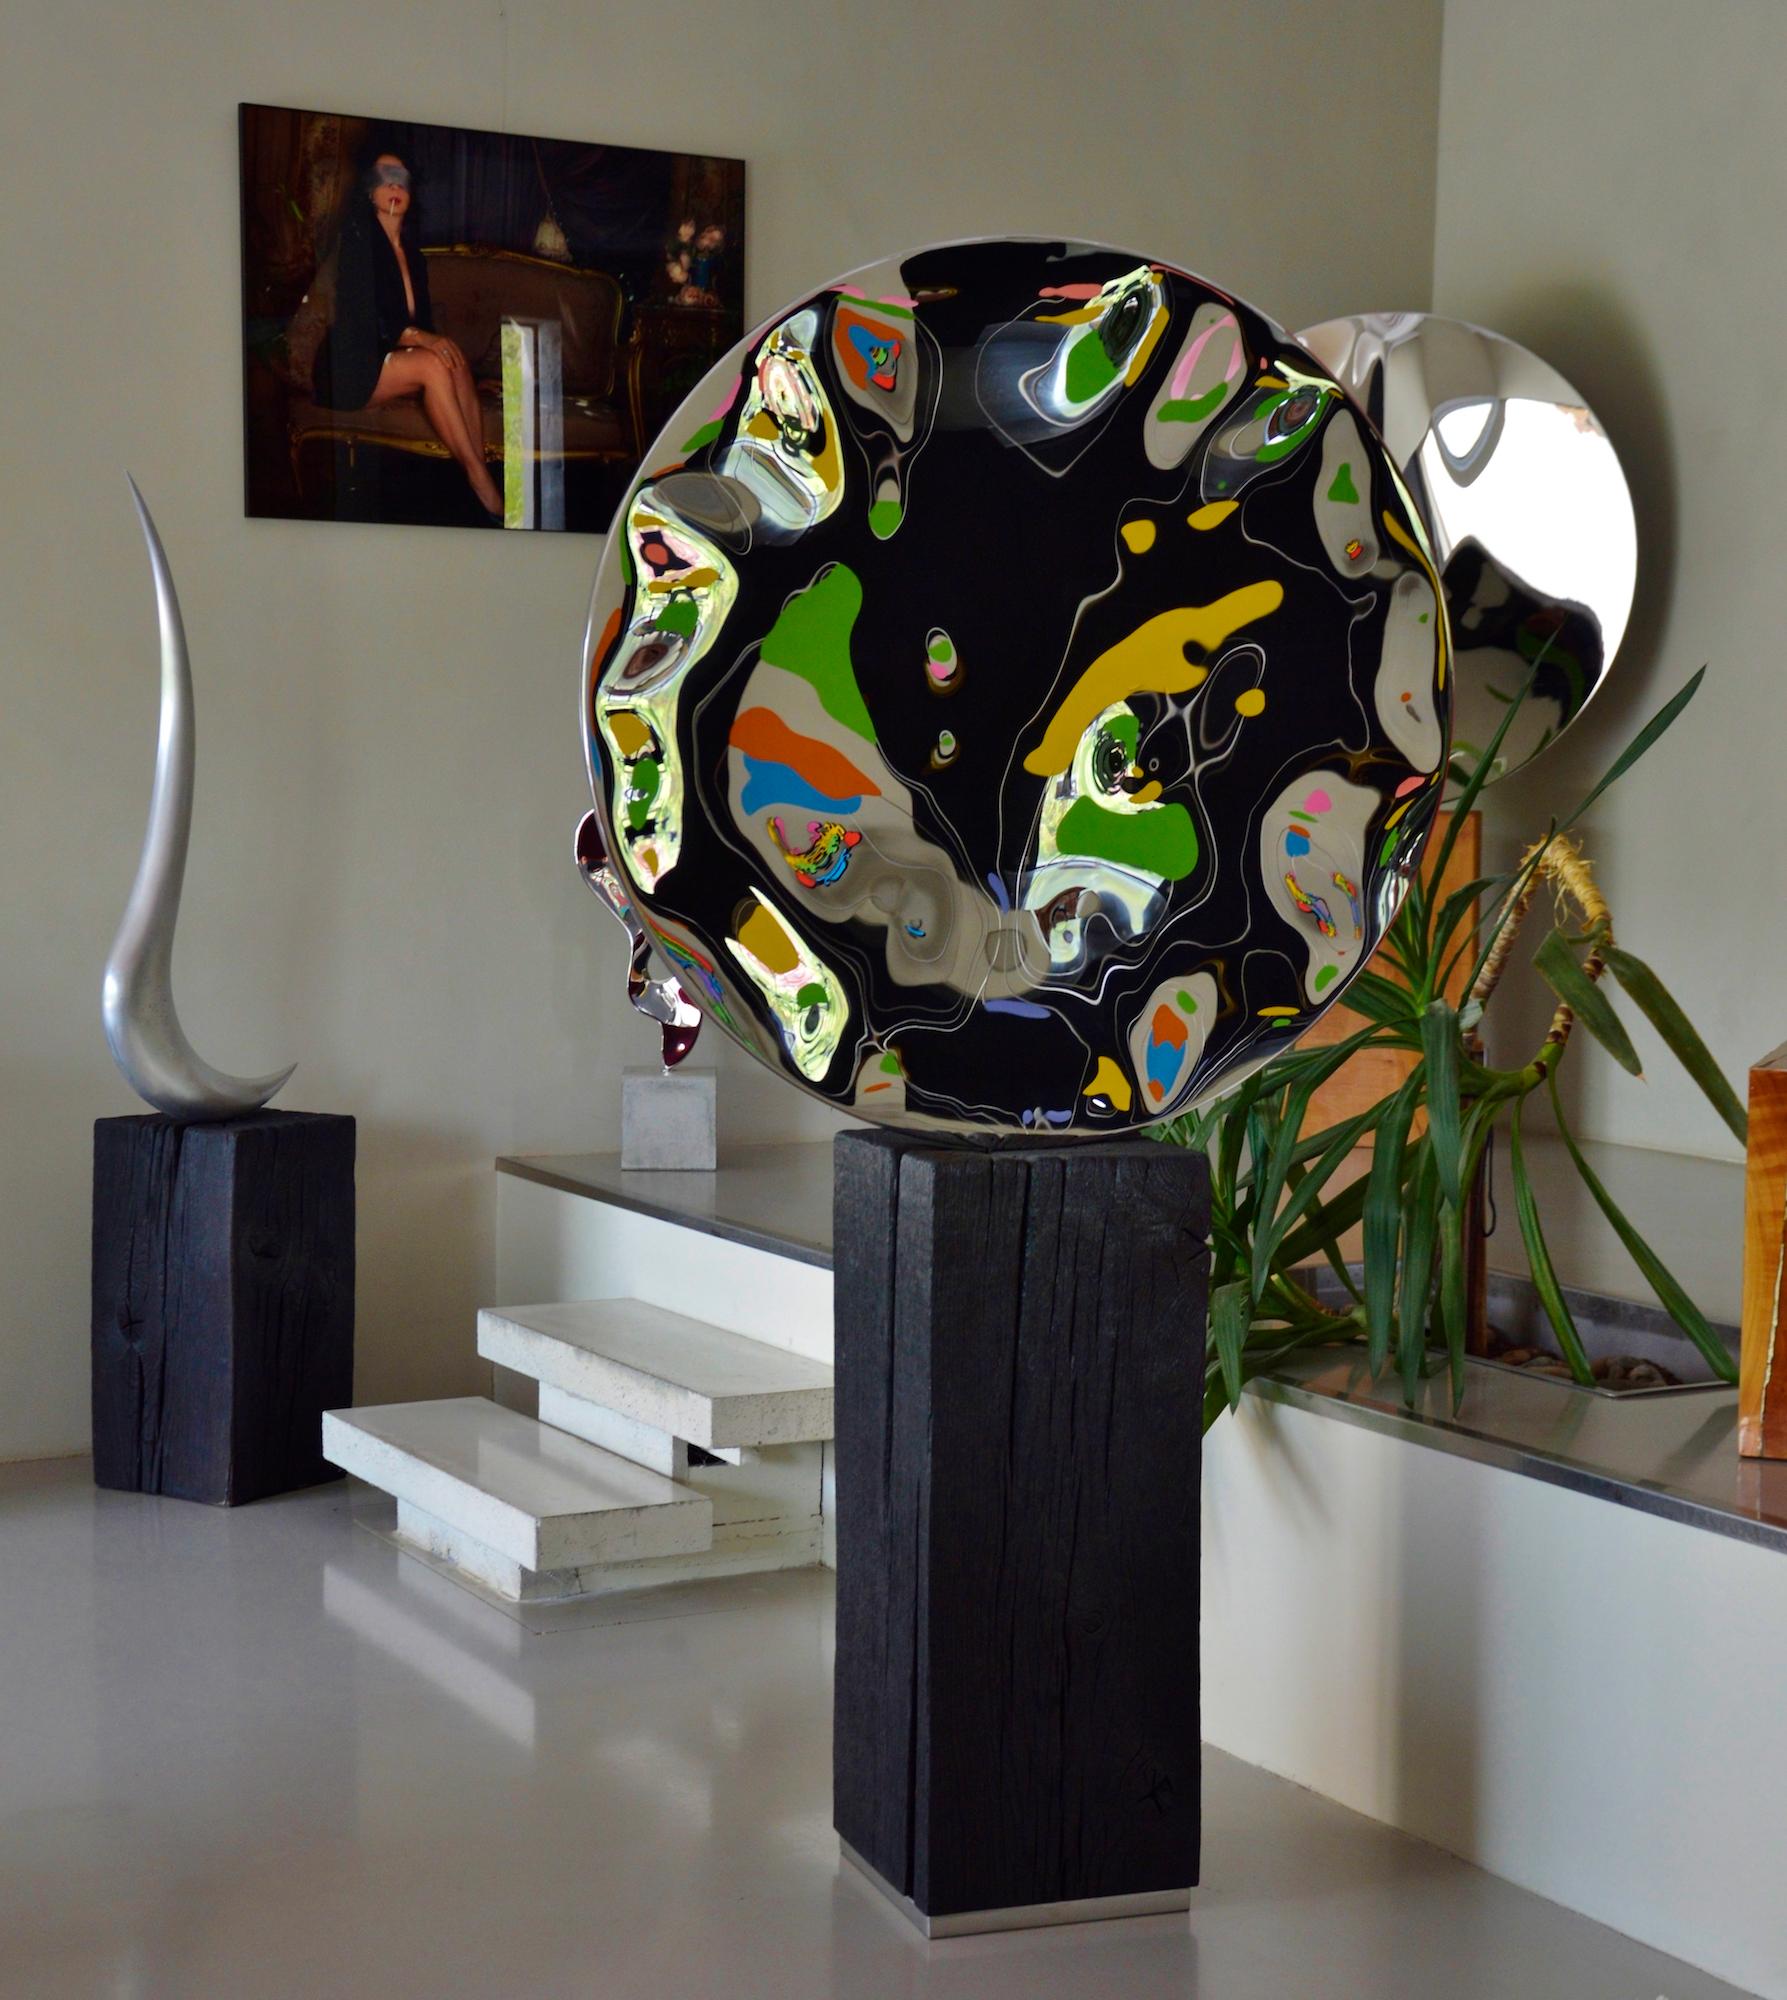 “Shattered” mirror II by Franck K - Stainless steel sculpture, reflection, light For Sale 4